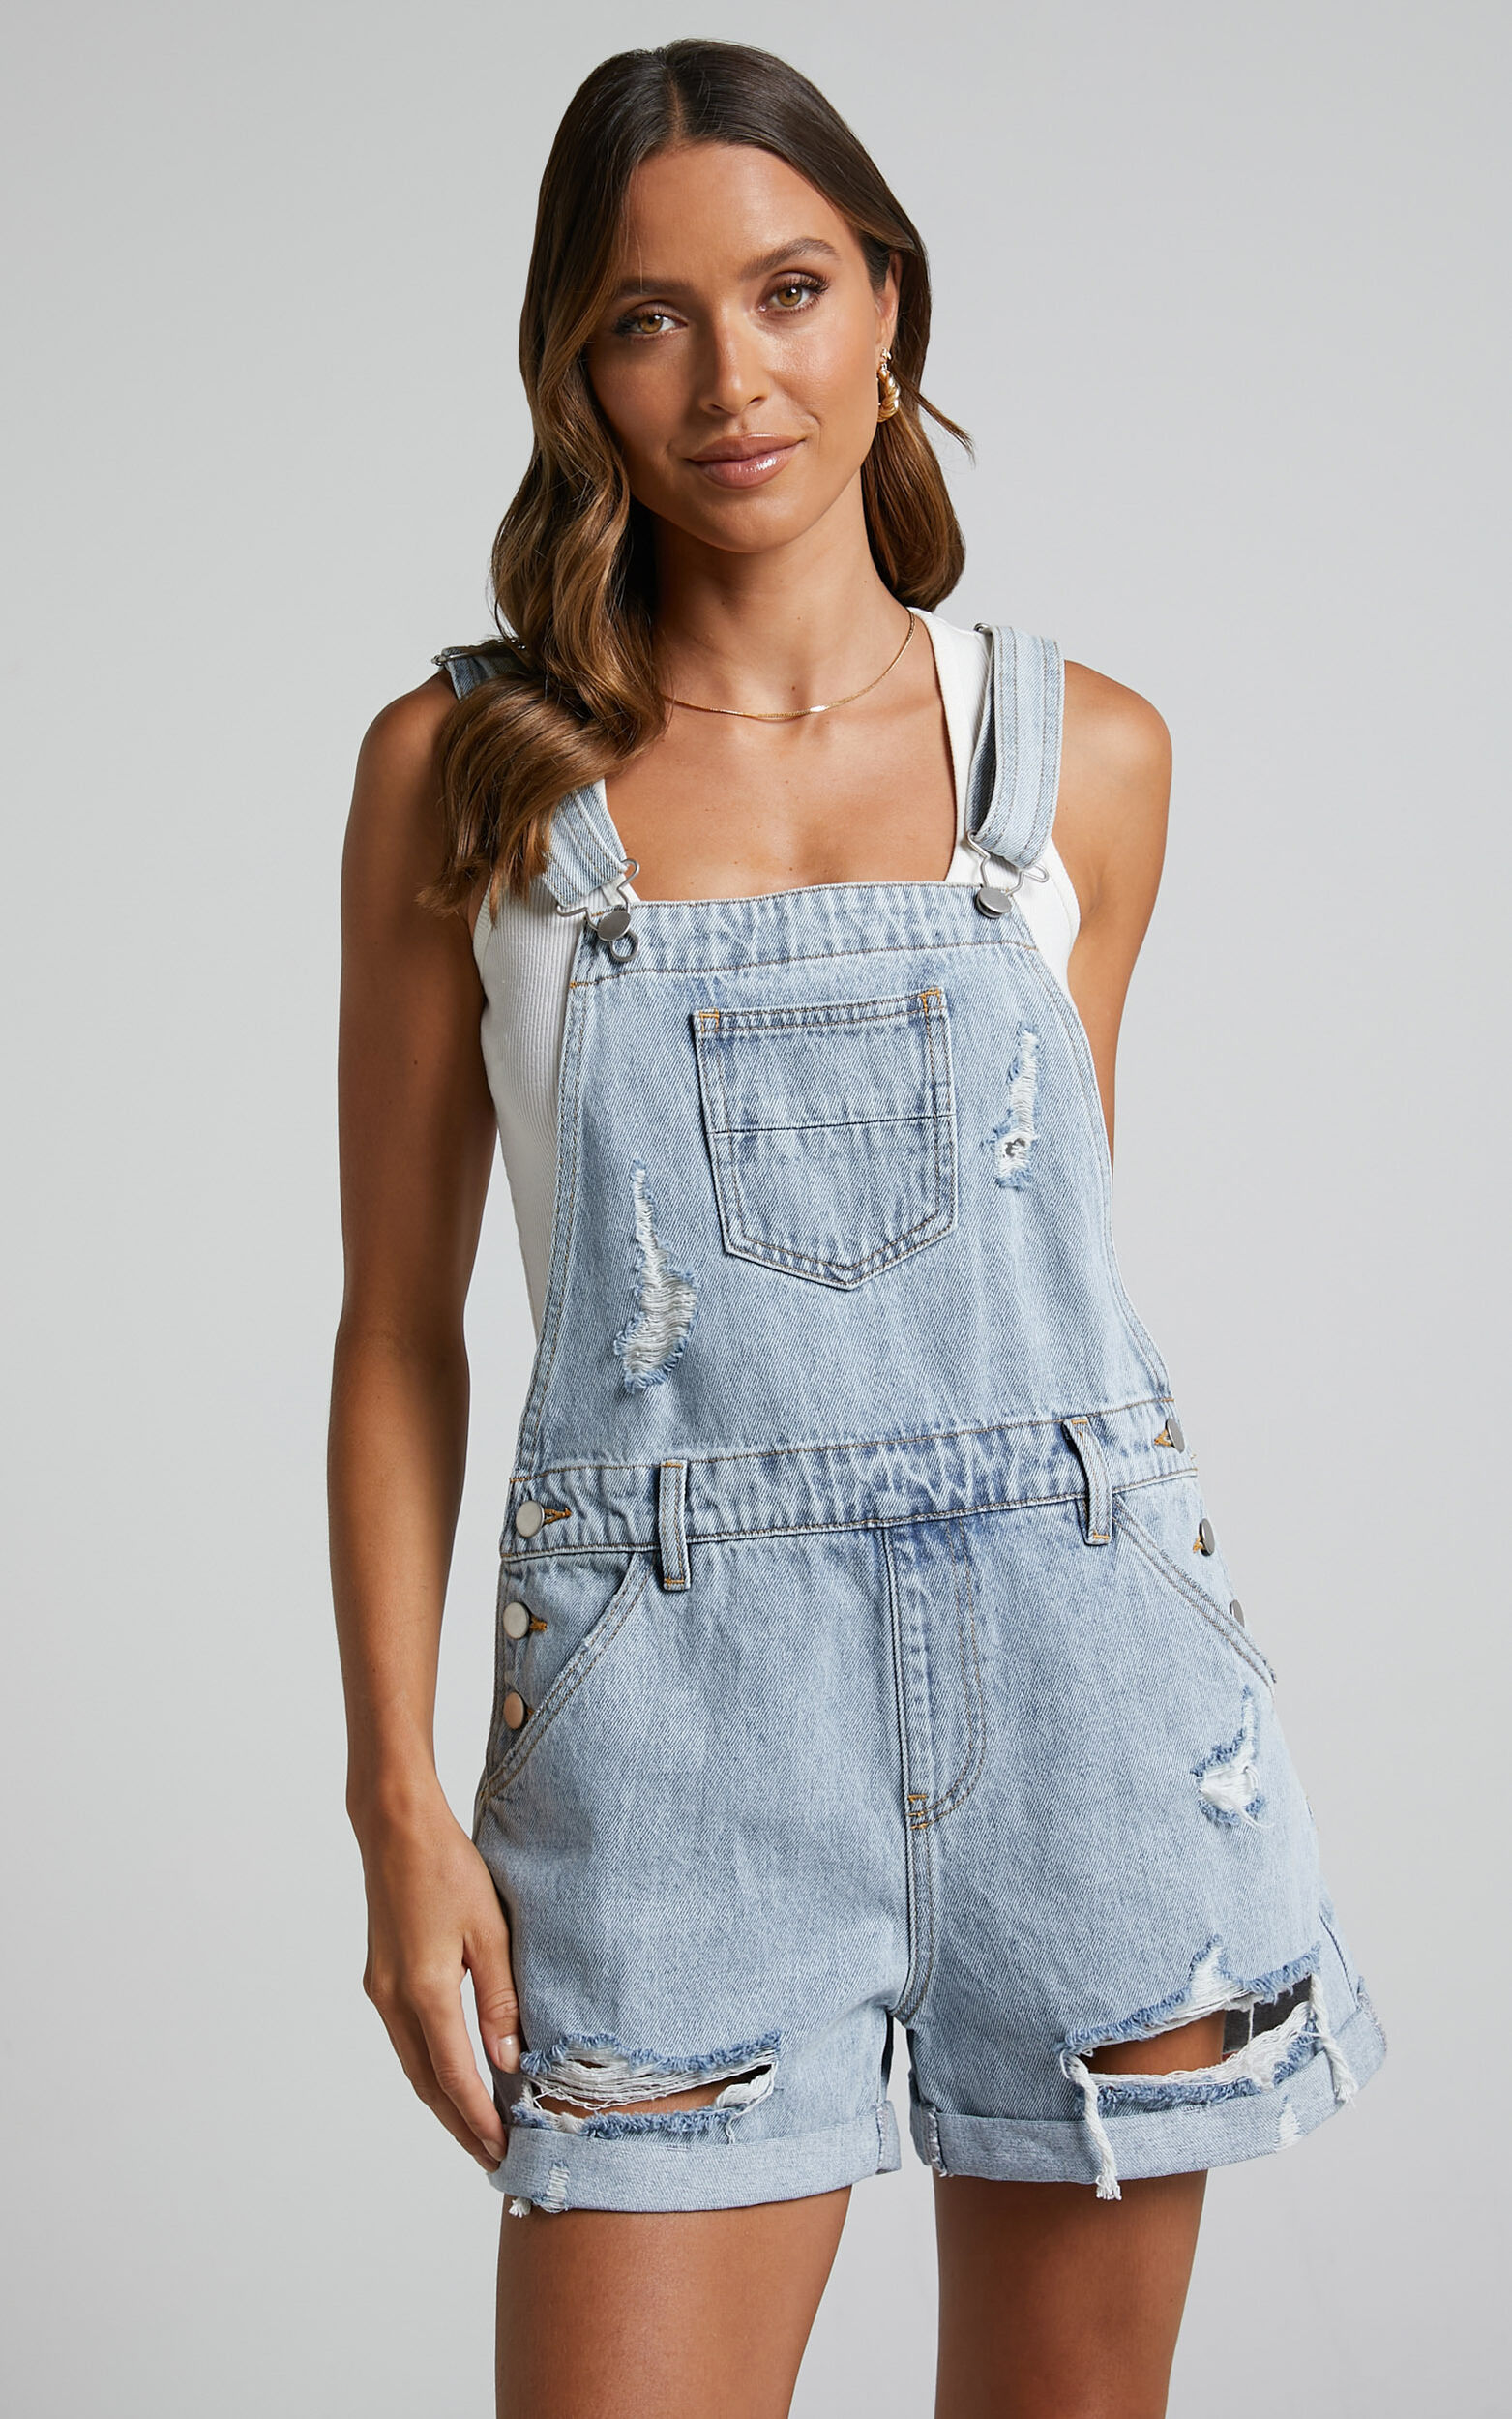 Rheana Overalls - Recycled Cotton Denim Short Overalls in Mid Blue Wash - 06, BLU1